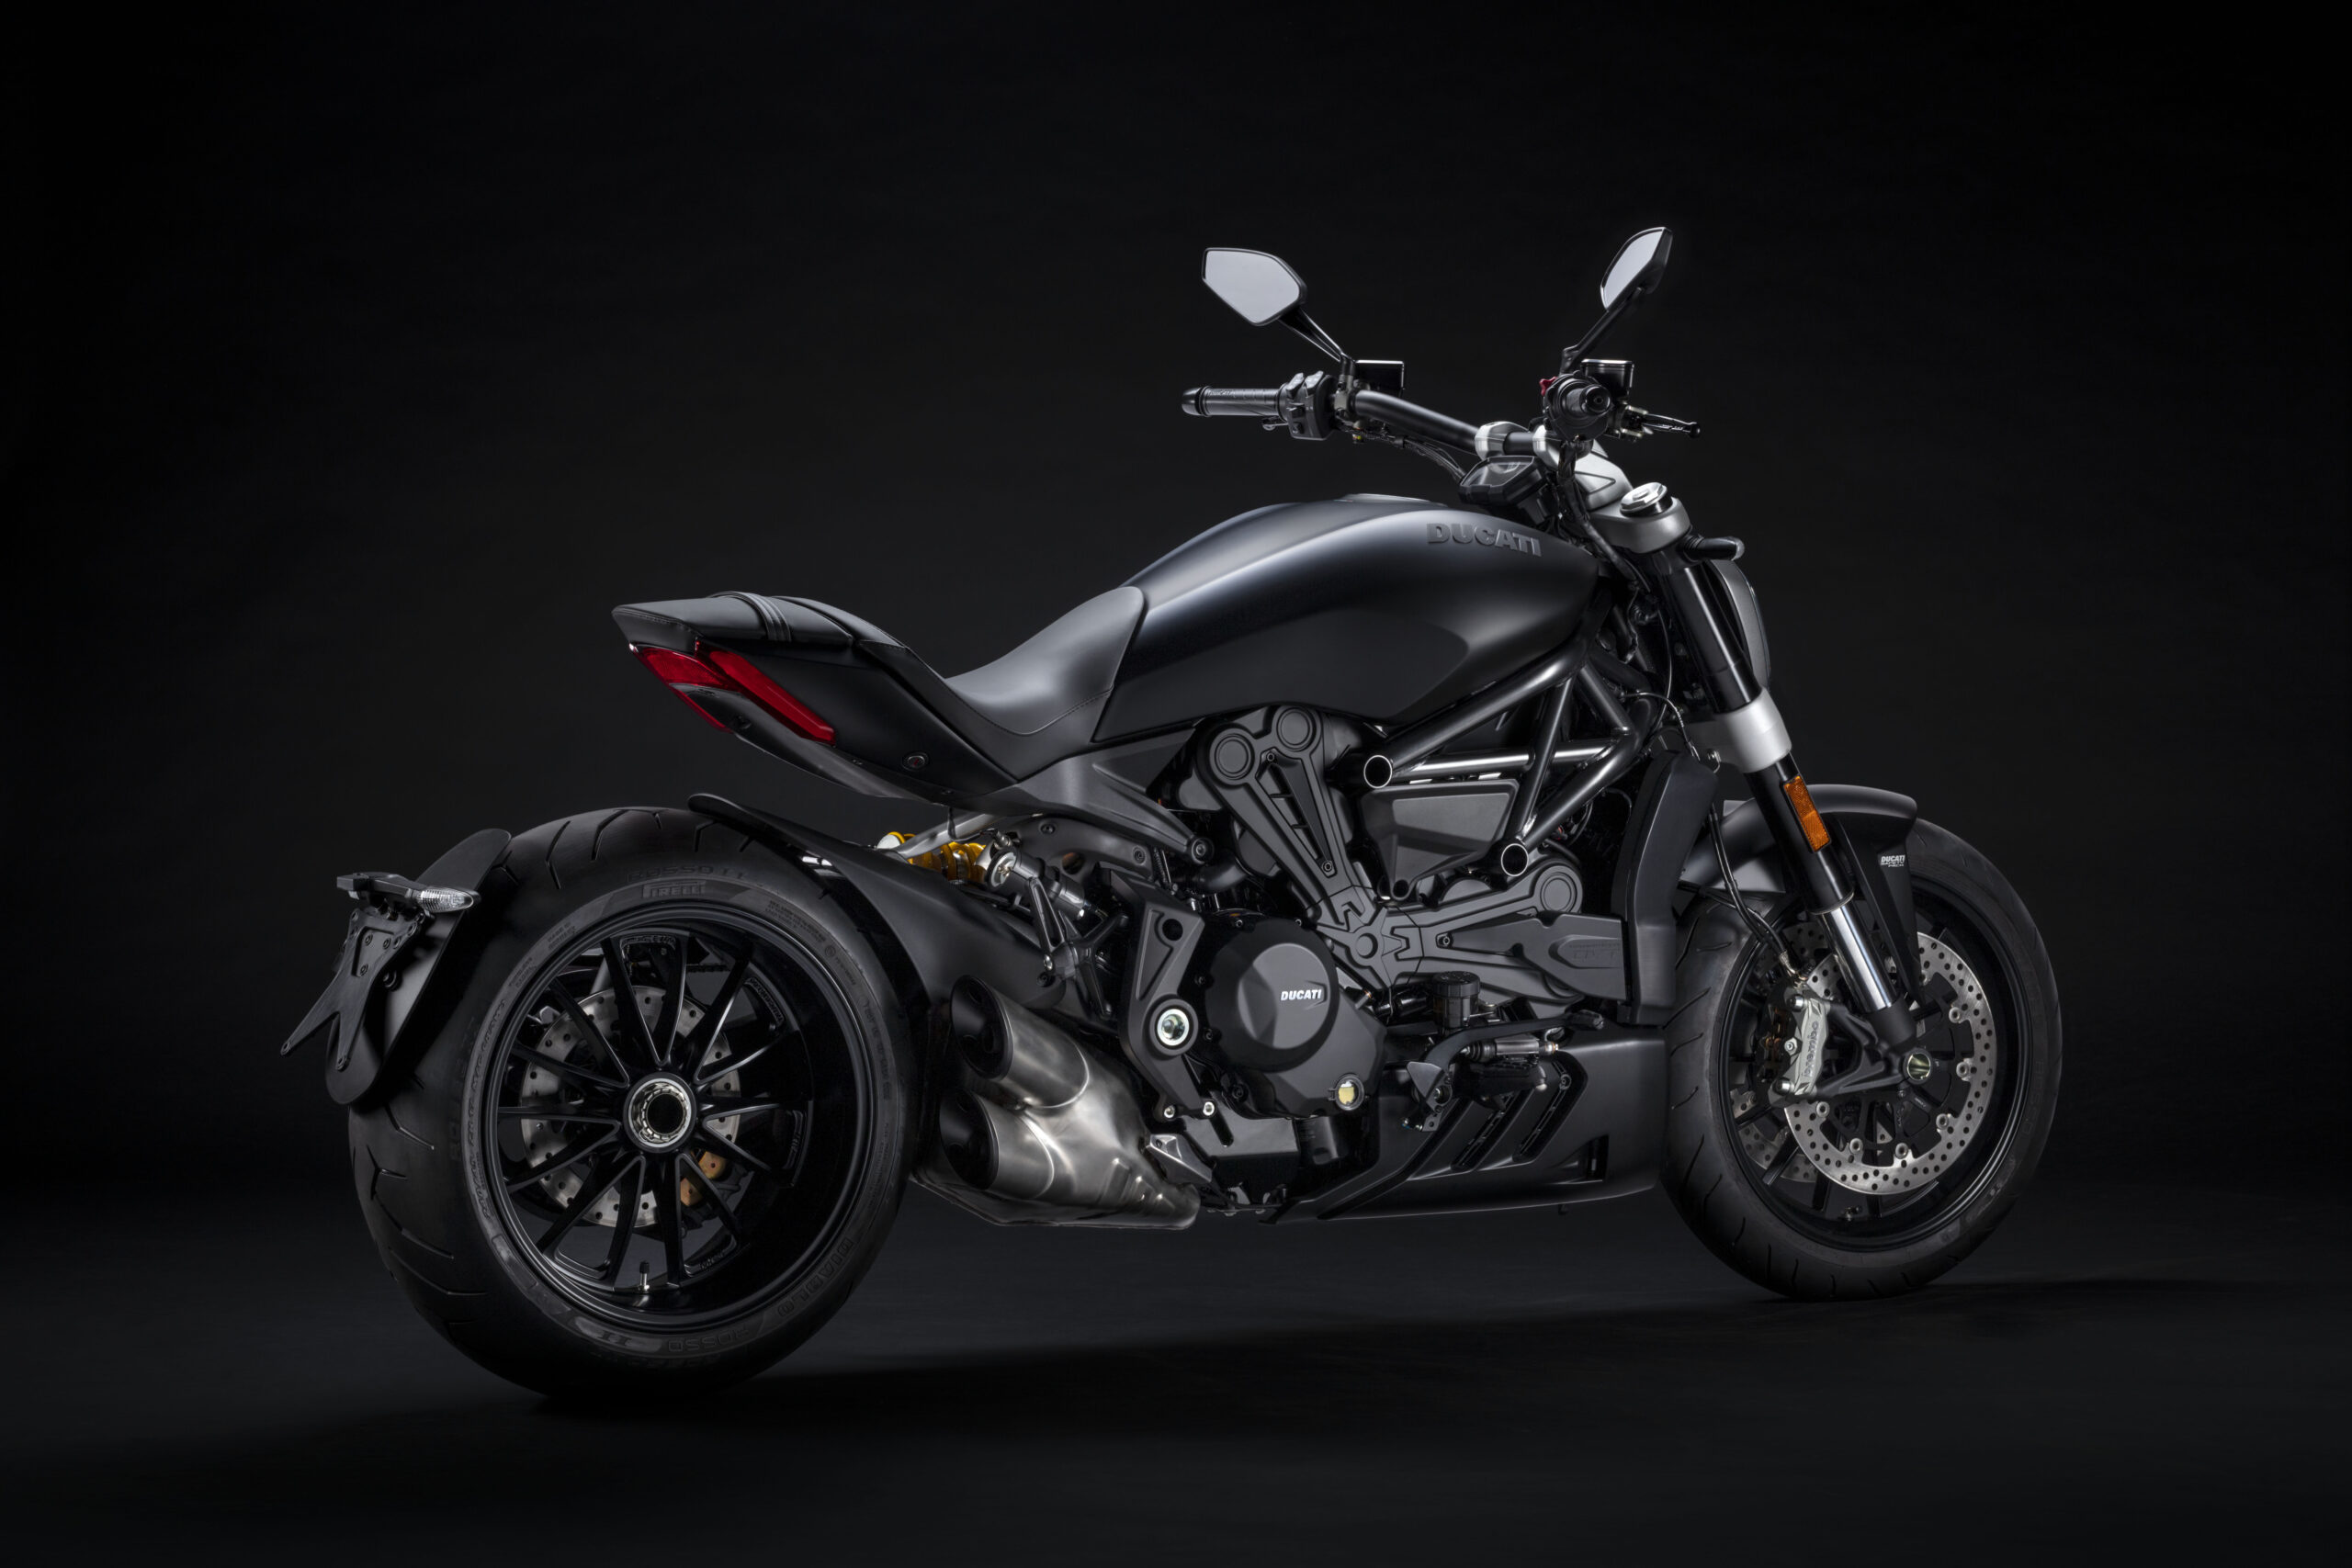 Ducati unveils XDiavel and Scrambler news® for 2021